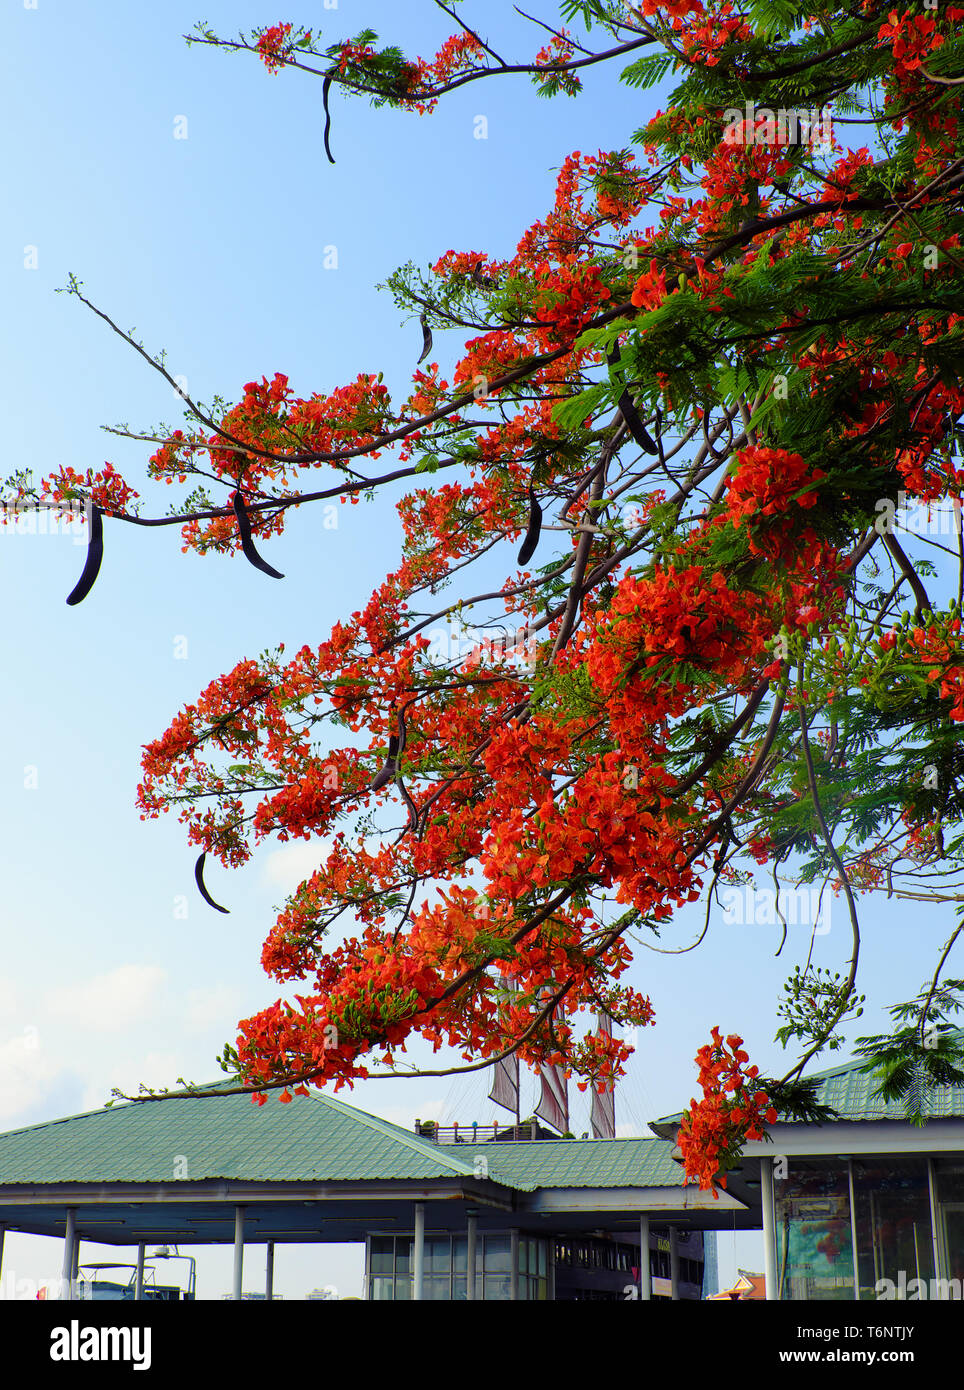 Flamboyant tree or phoenix flower,  urban tree that bloom bright red flowers in summer season, beautiful blossom on branch of tree from bottom view Stock Photo